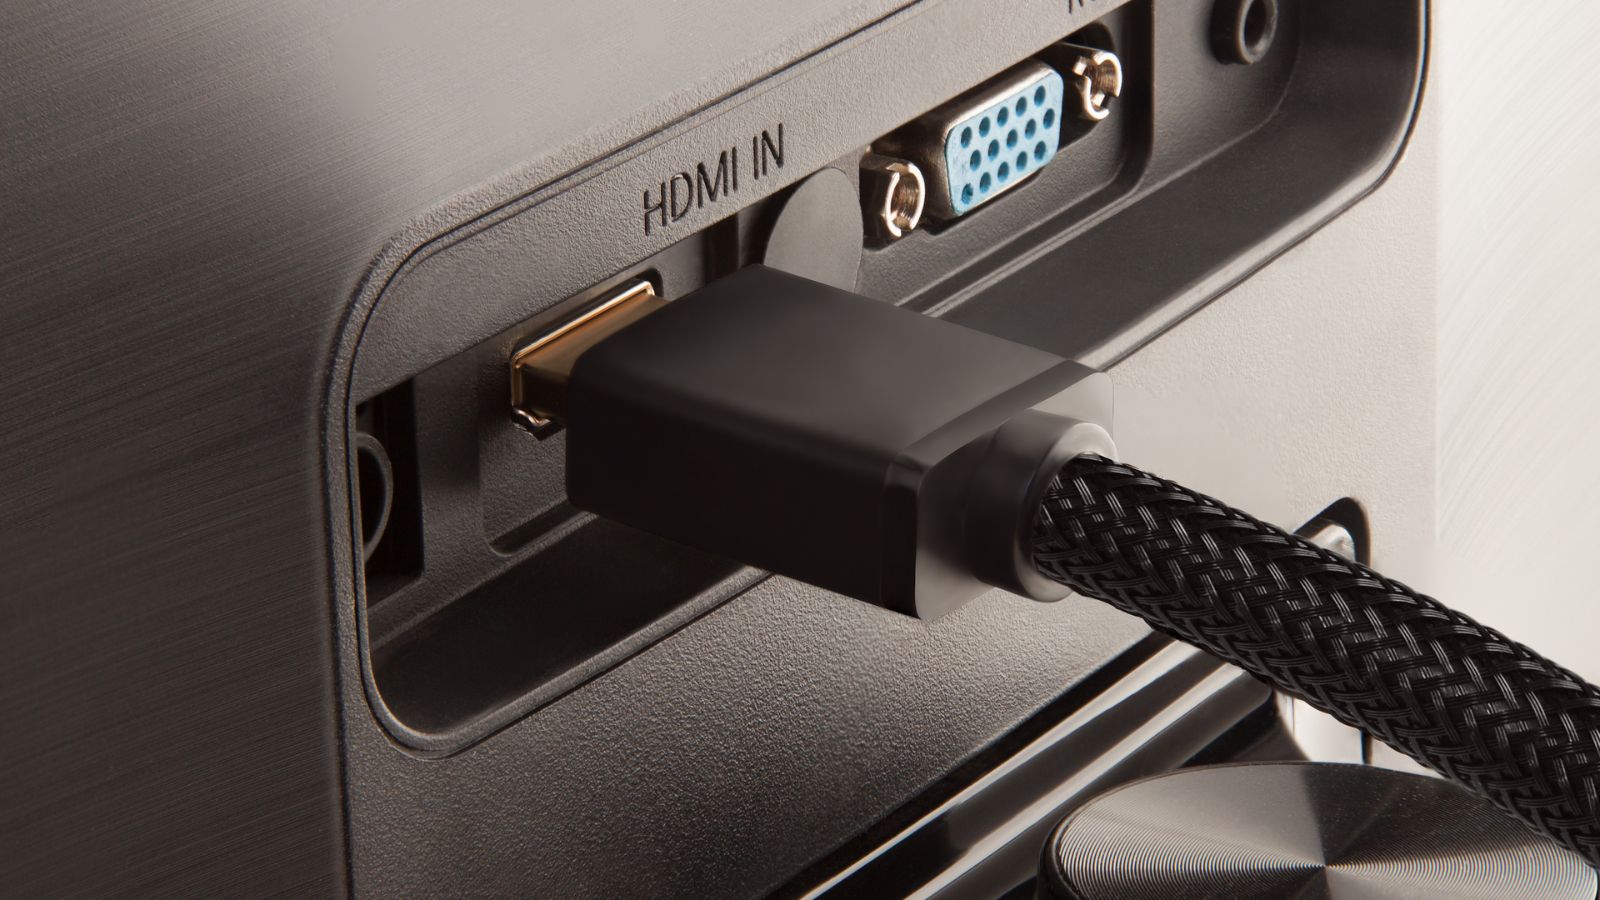 HDMI cable going into port on back of monitor